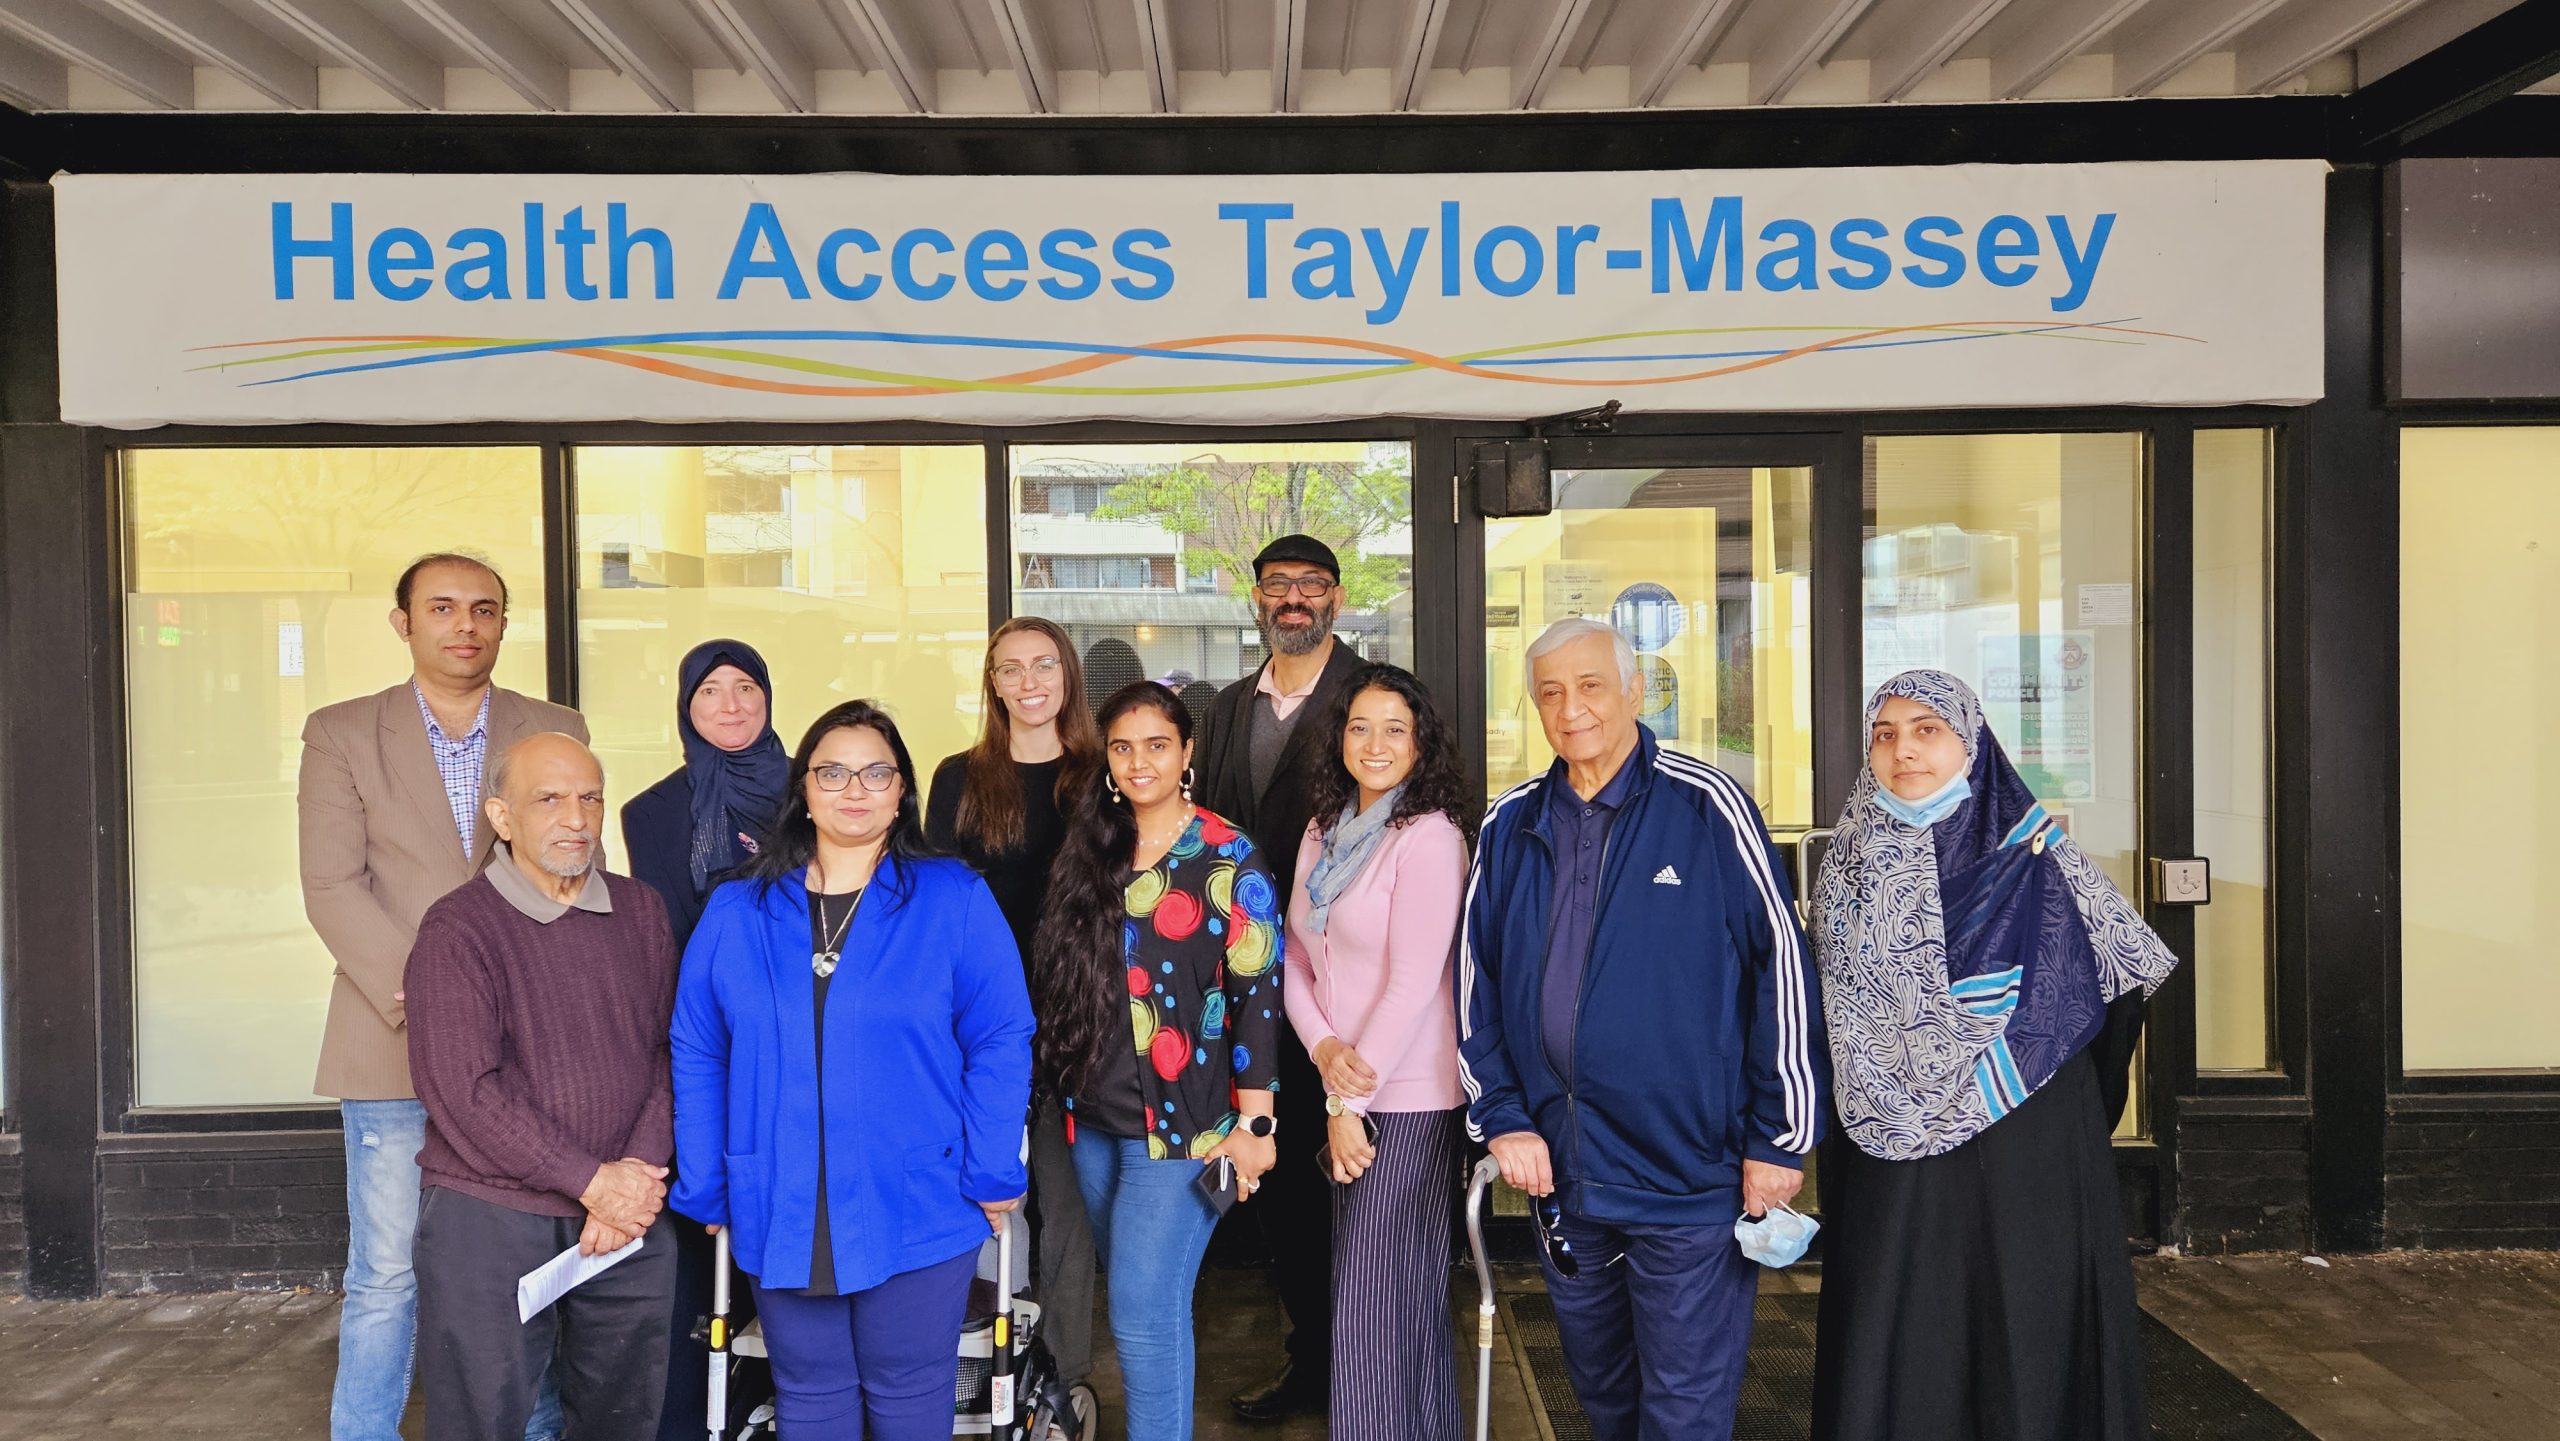 Ten Taylor-Massey Residents Wellness Council members standing outside of Health Access Taylor-Massey smiling.